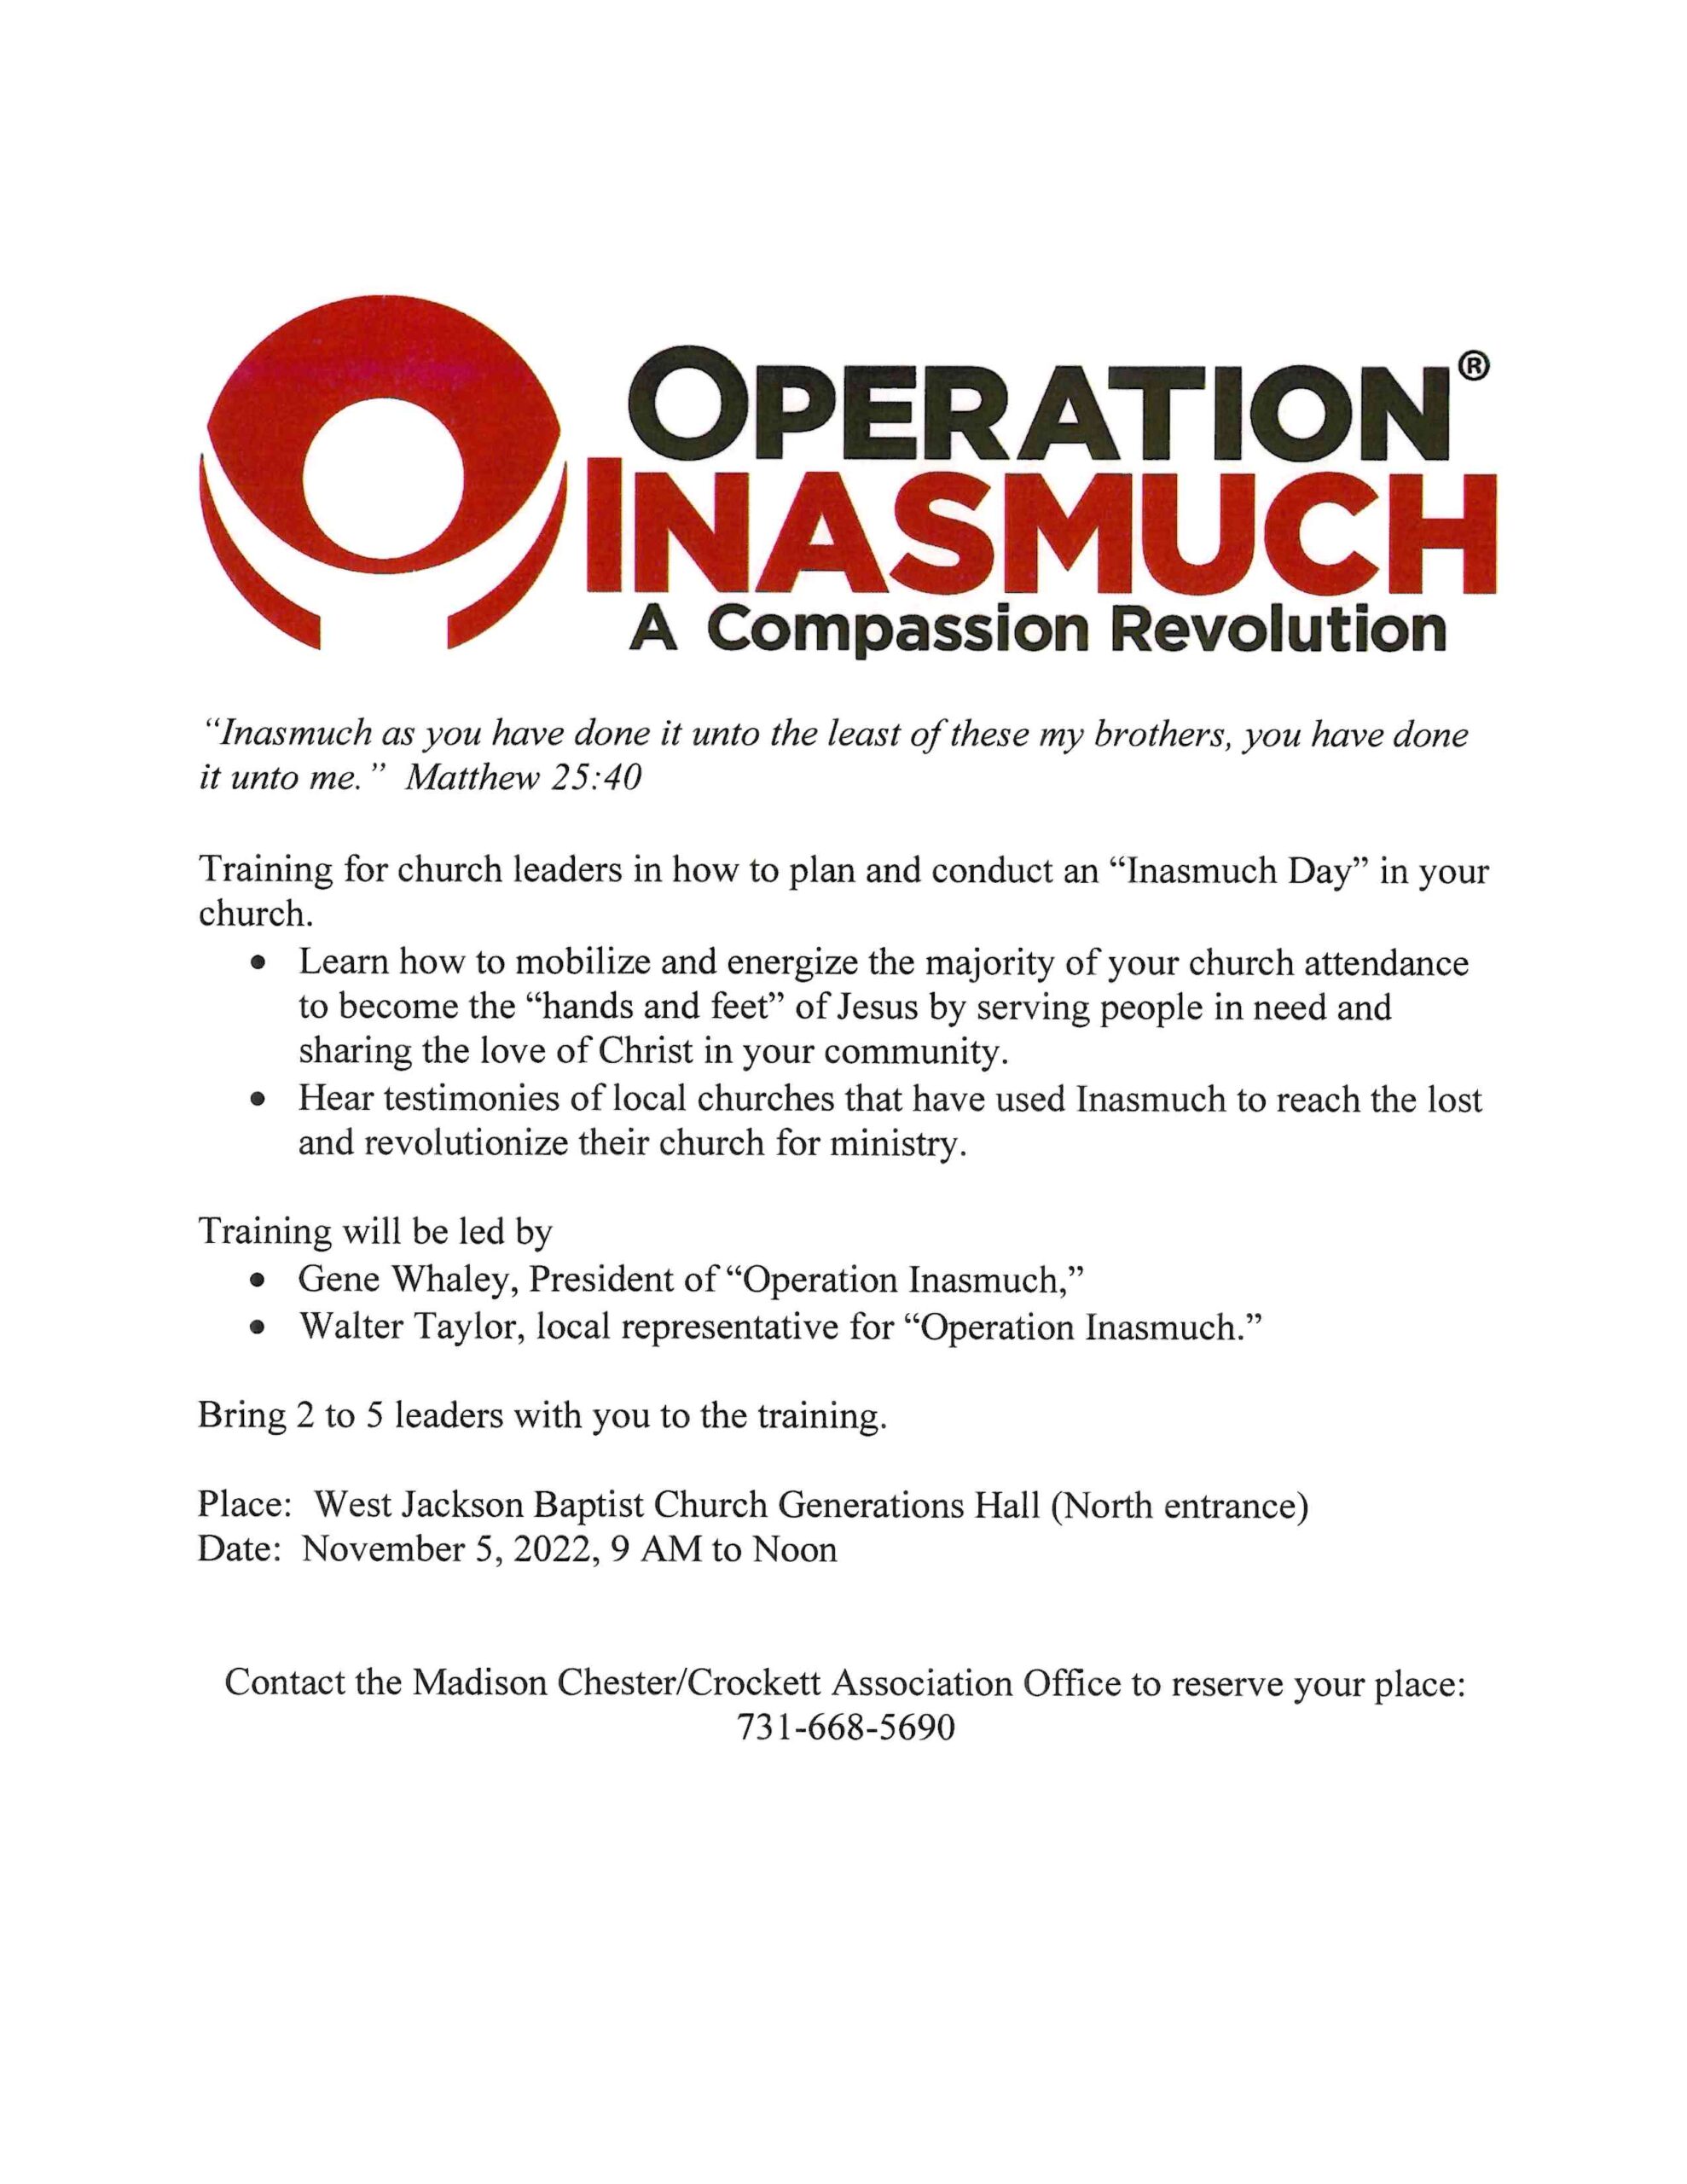 Operation Inasmuch Training